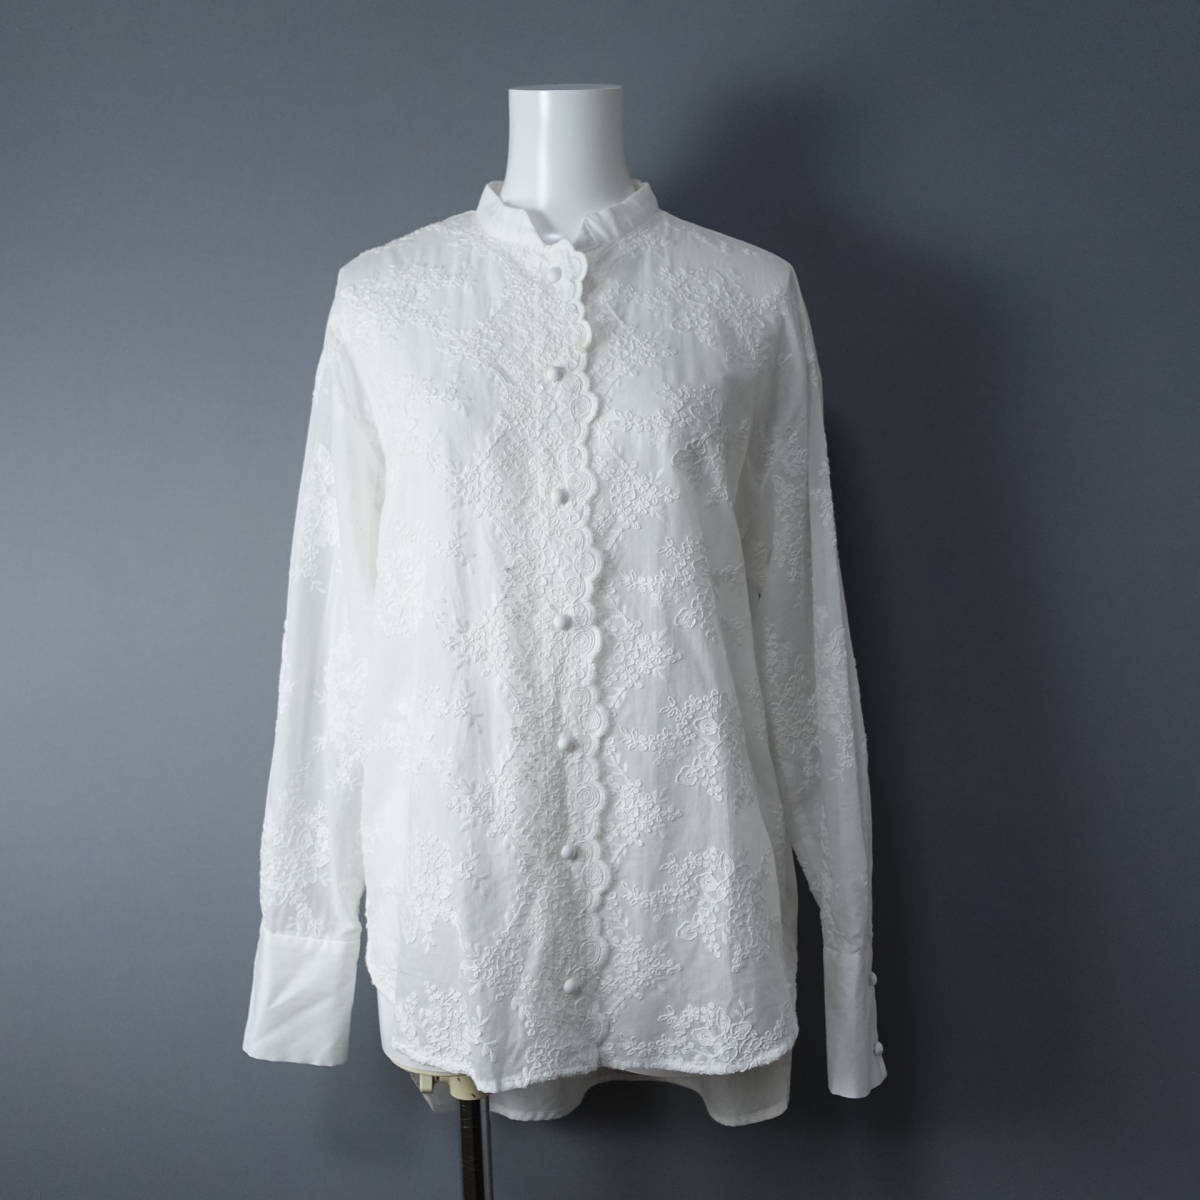 MIDIUMISOLID/ midi umi solid / made in Japan / race shirt / white / white / lady's / blouse / long sleeve 